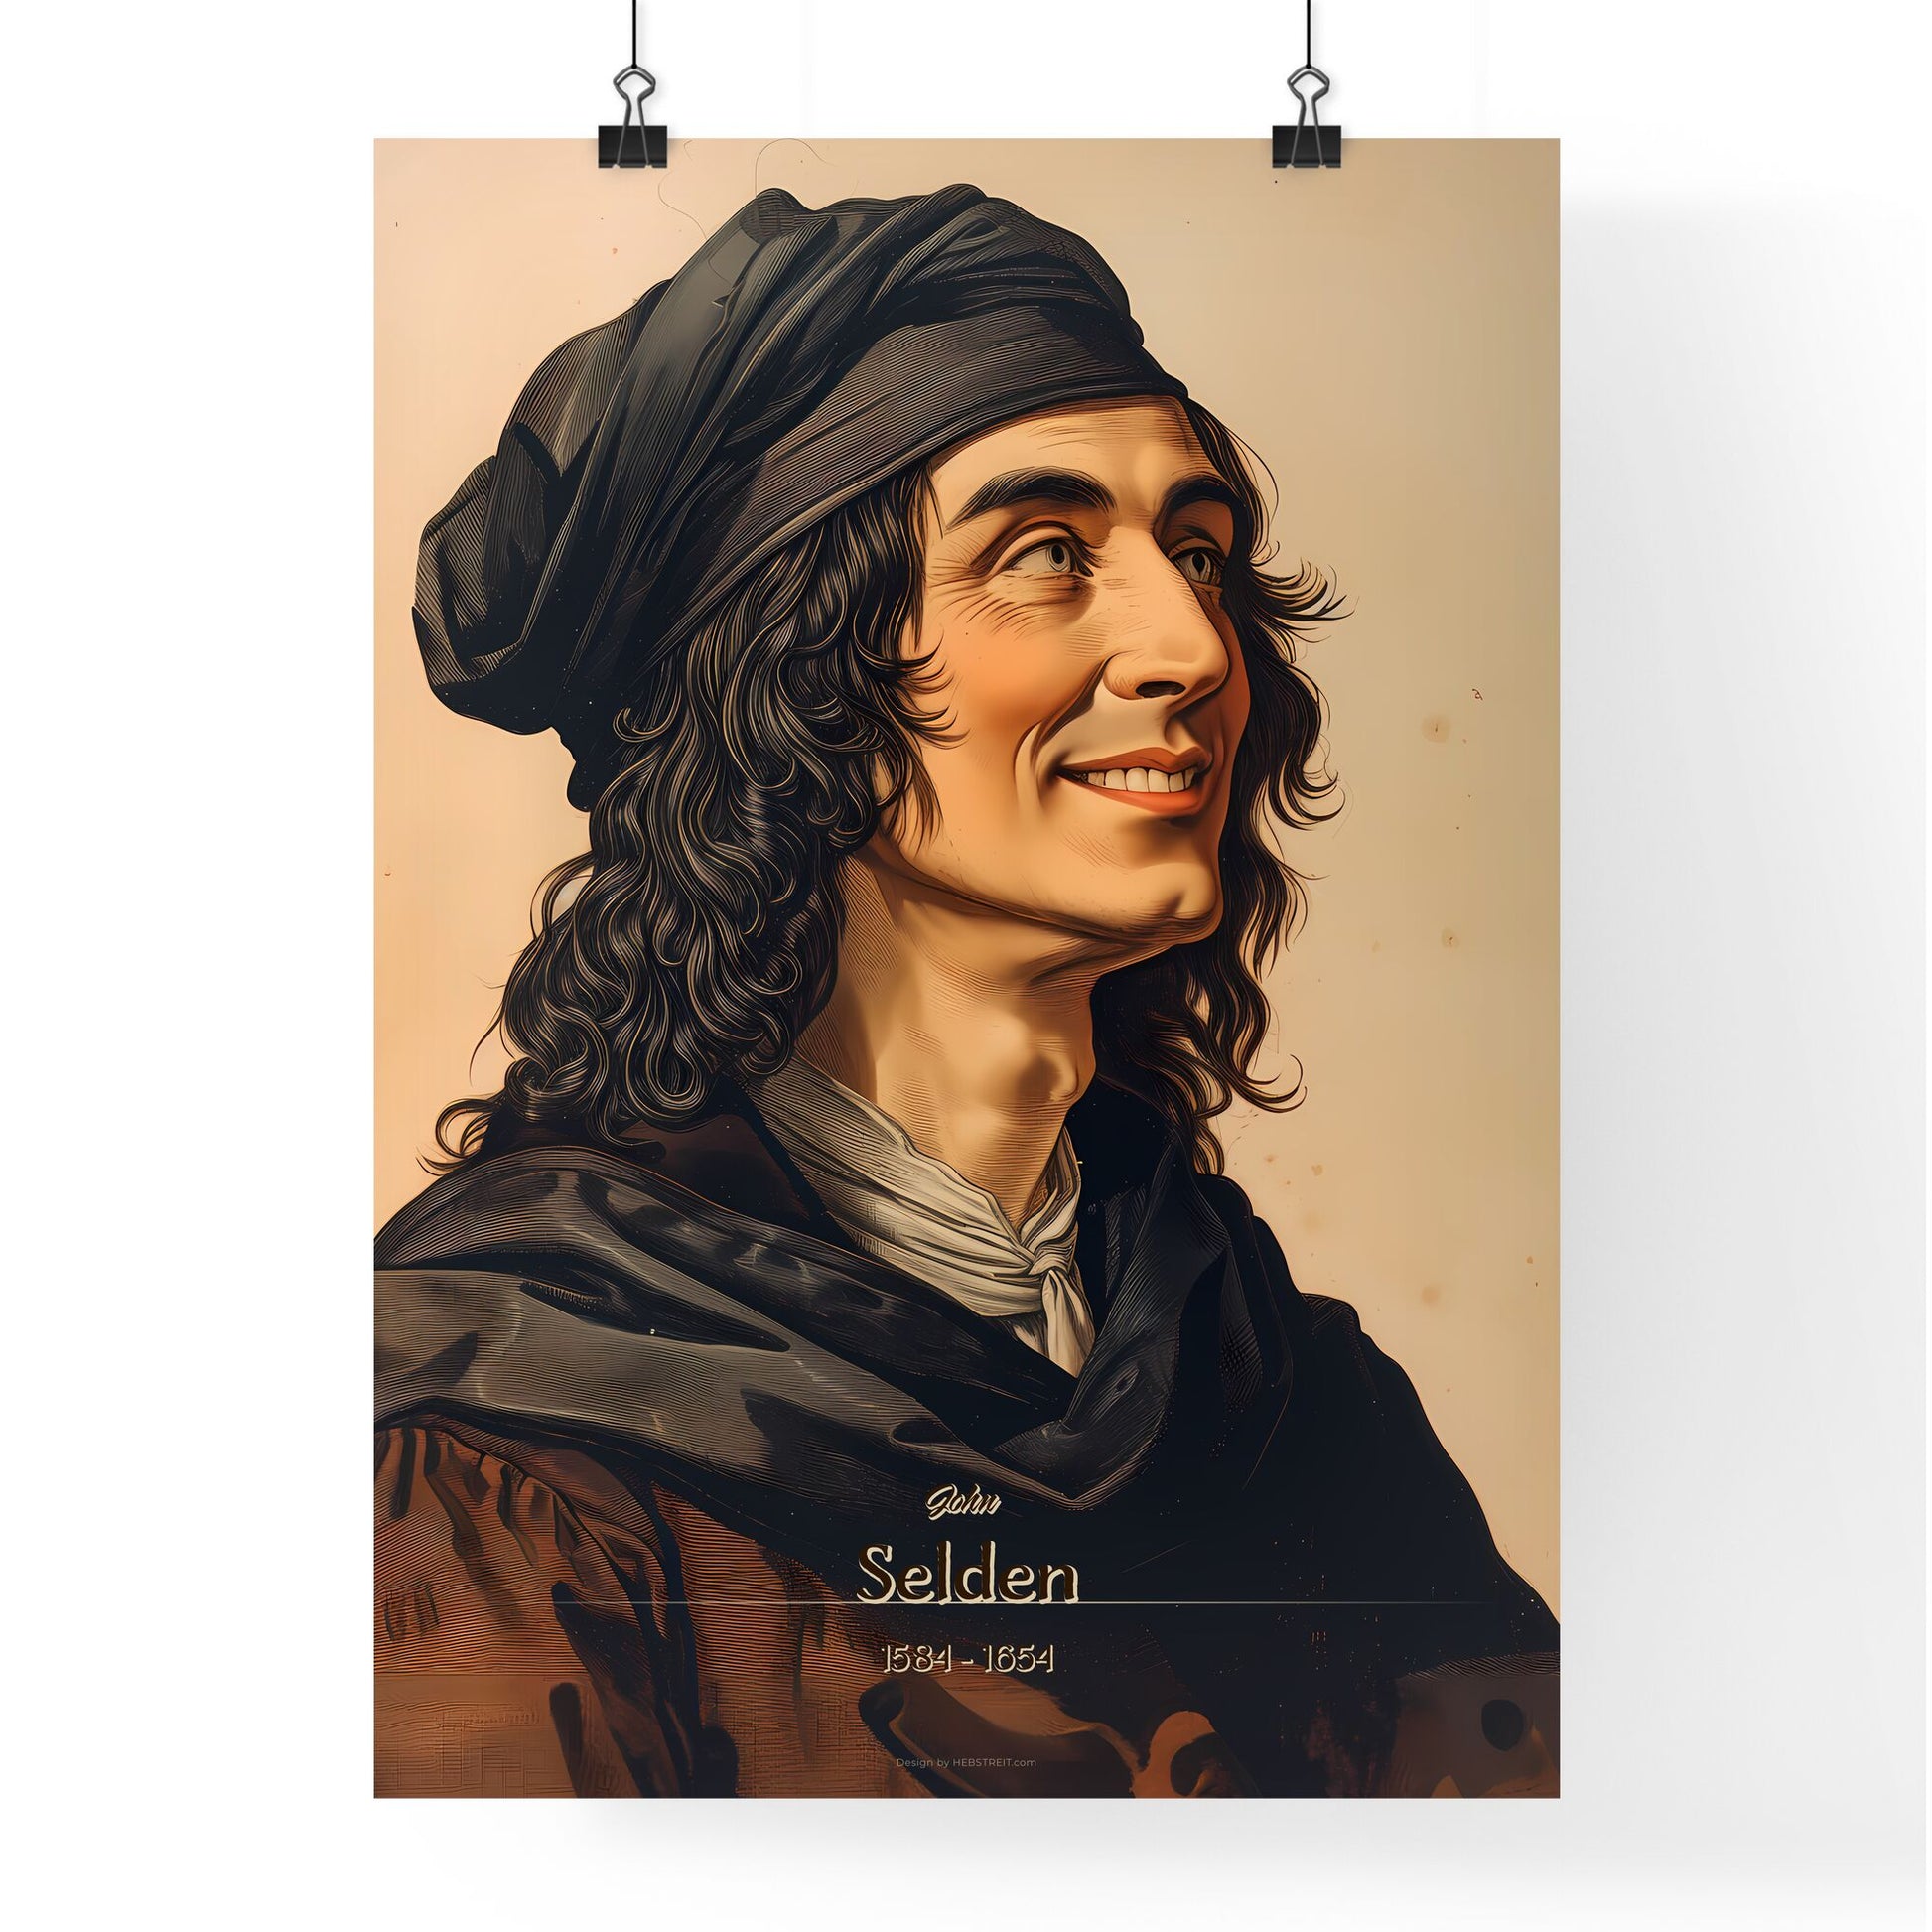 John, Selden, 1584 - 1654, A Poster of a man with long hair and a black hat Default Title